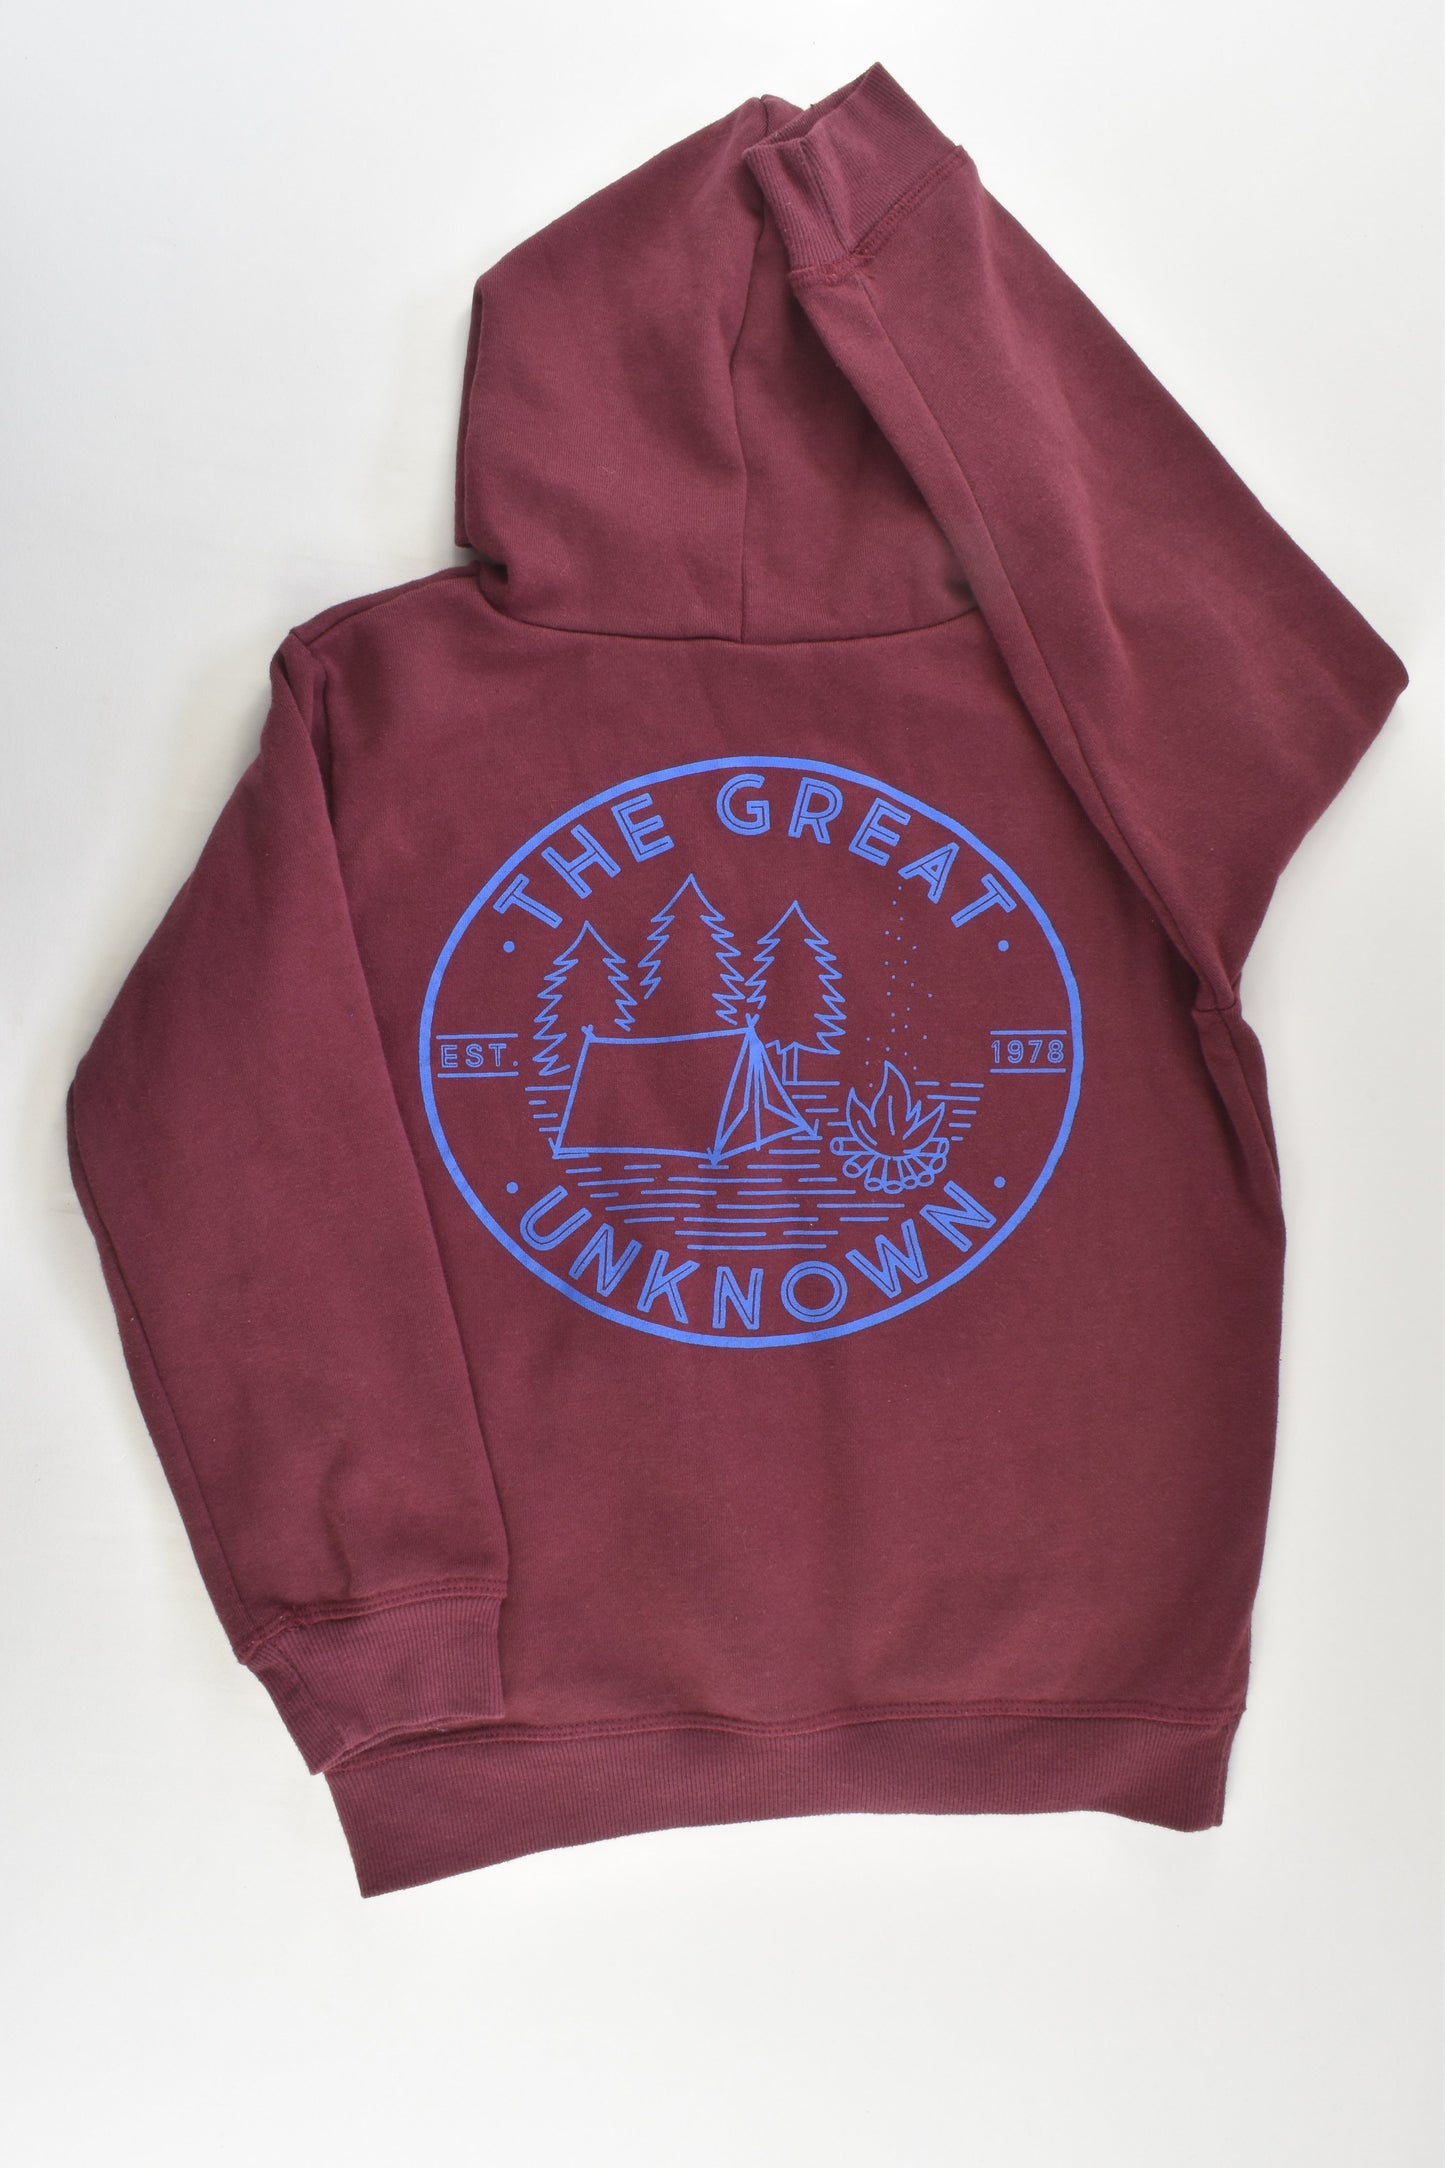 Cotton On Kids Size 9-10 'The Great Unknown' Hooded Jumper